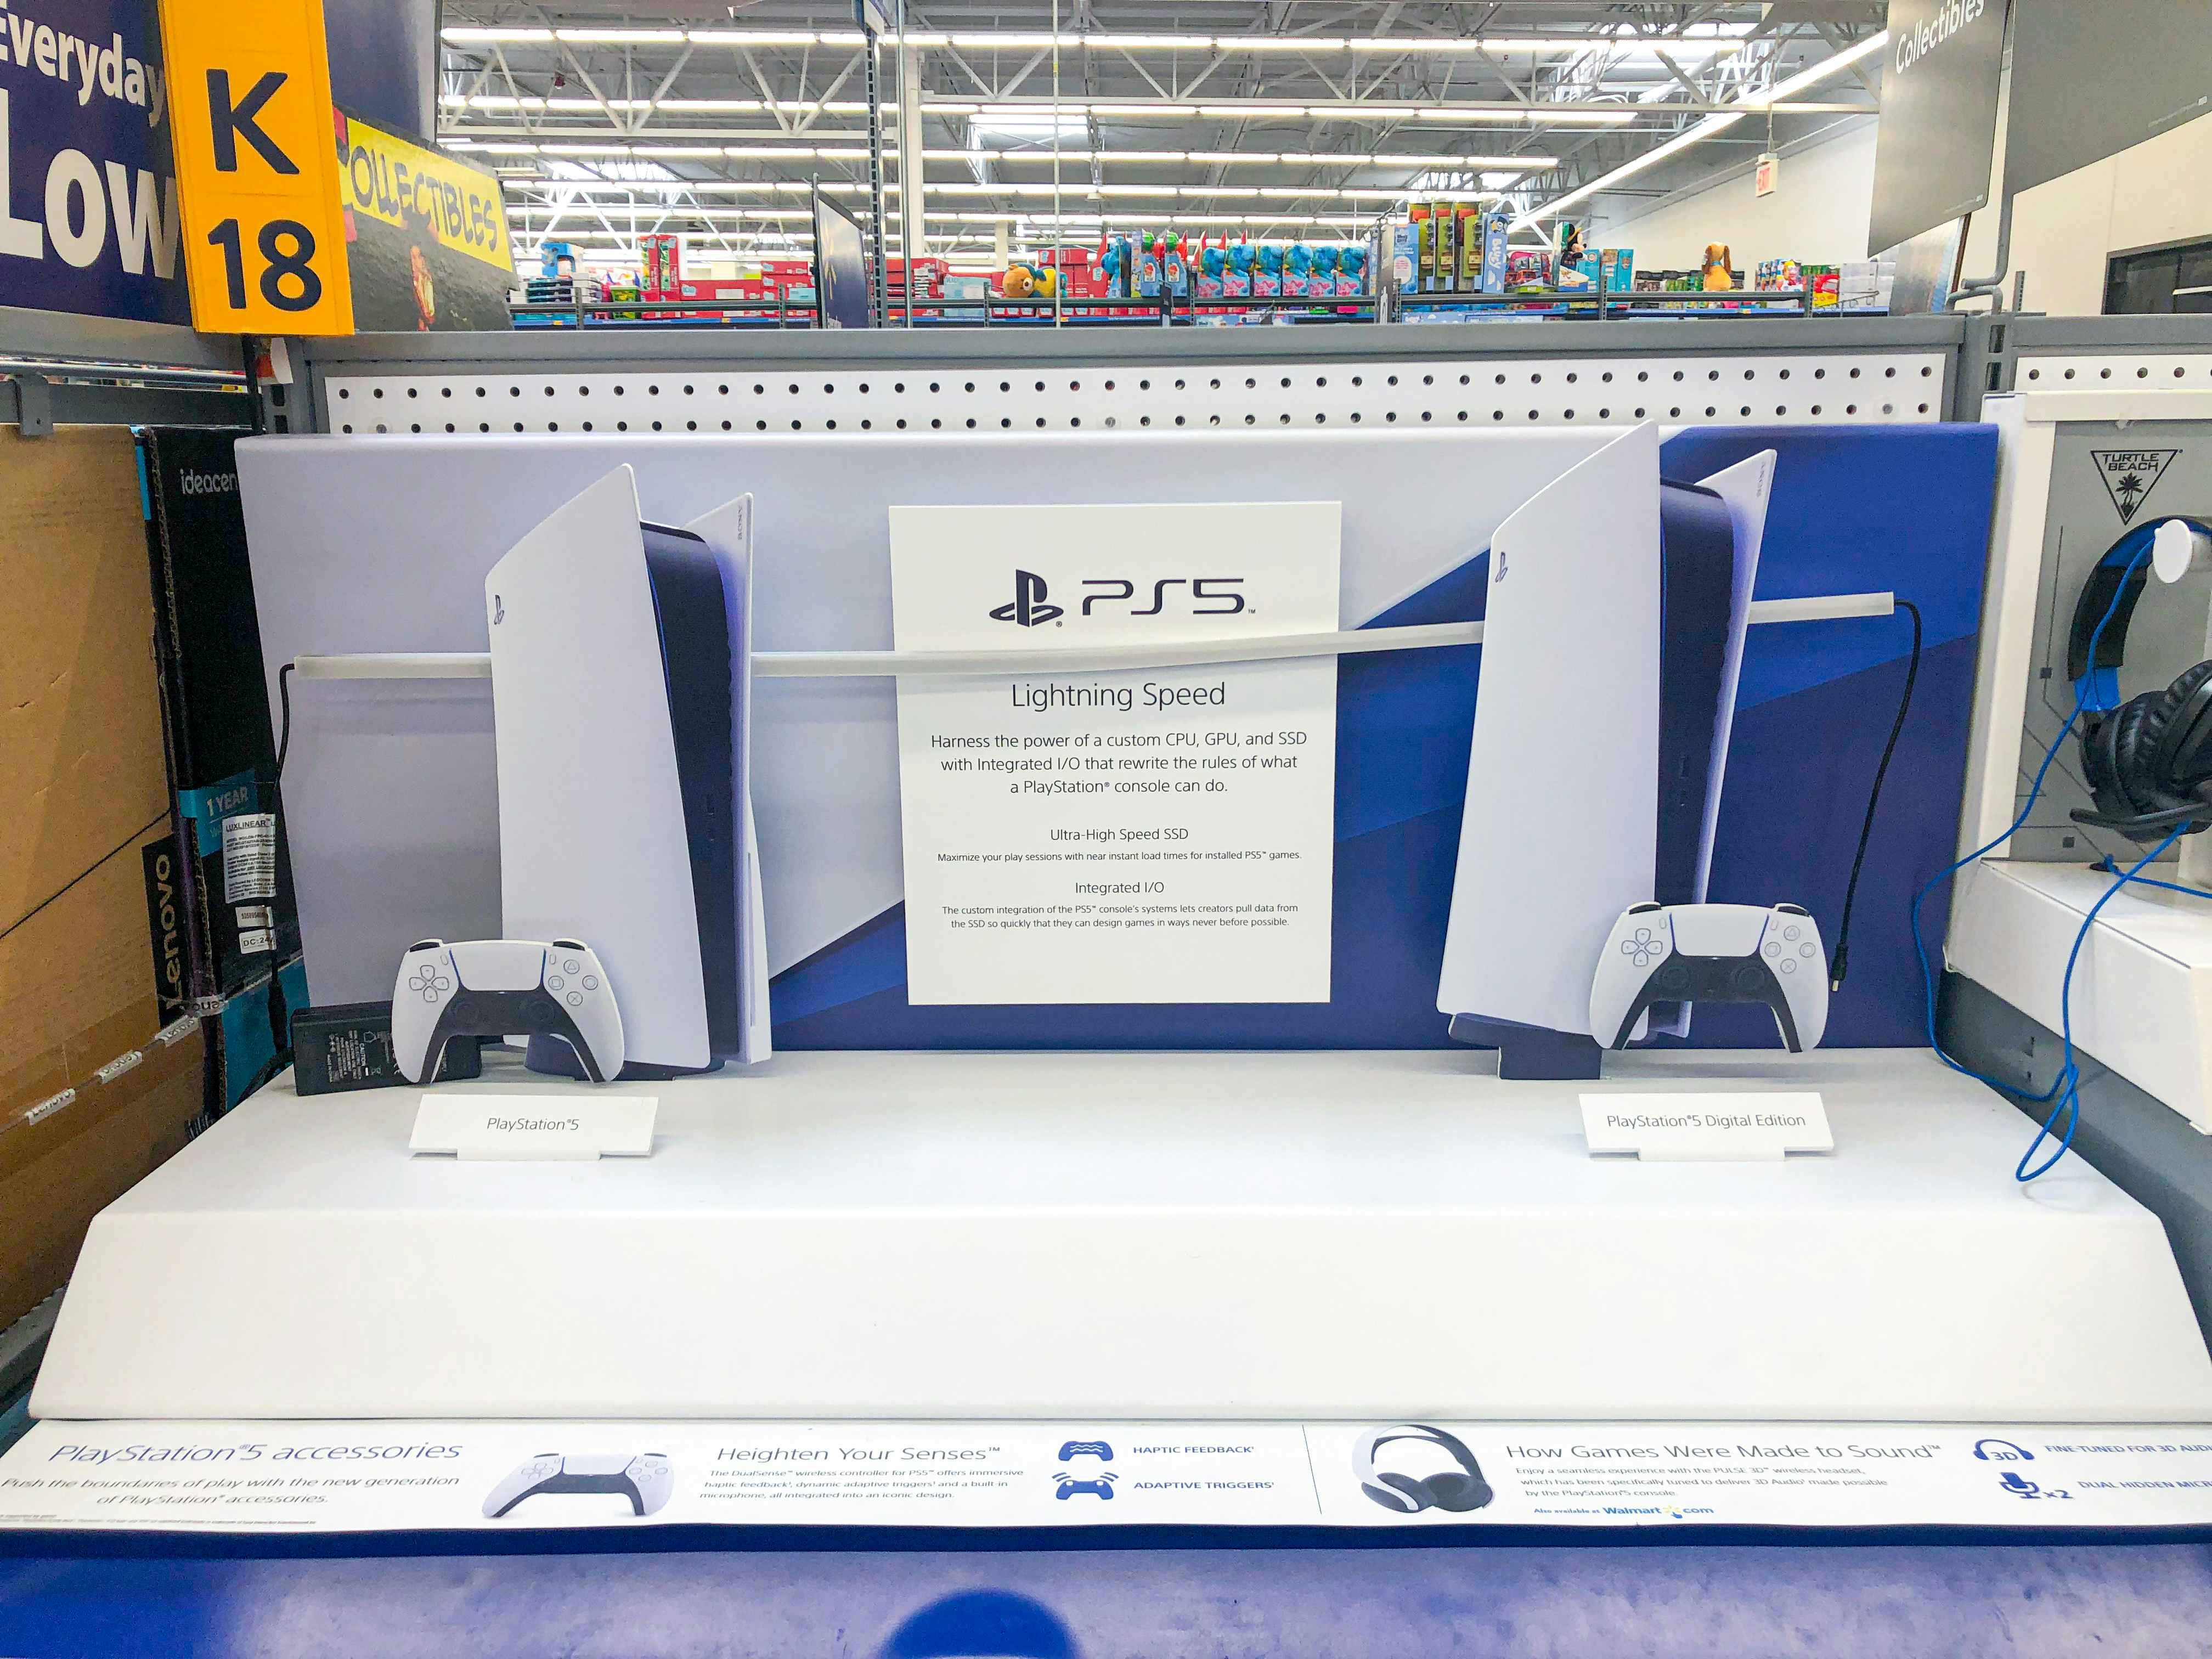 a PS5 product display inside Walmart electronics section.